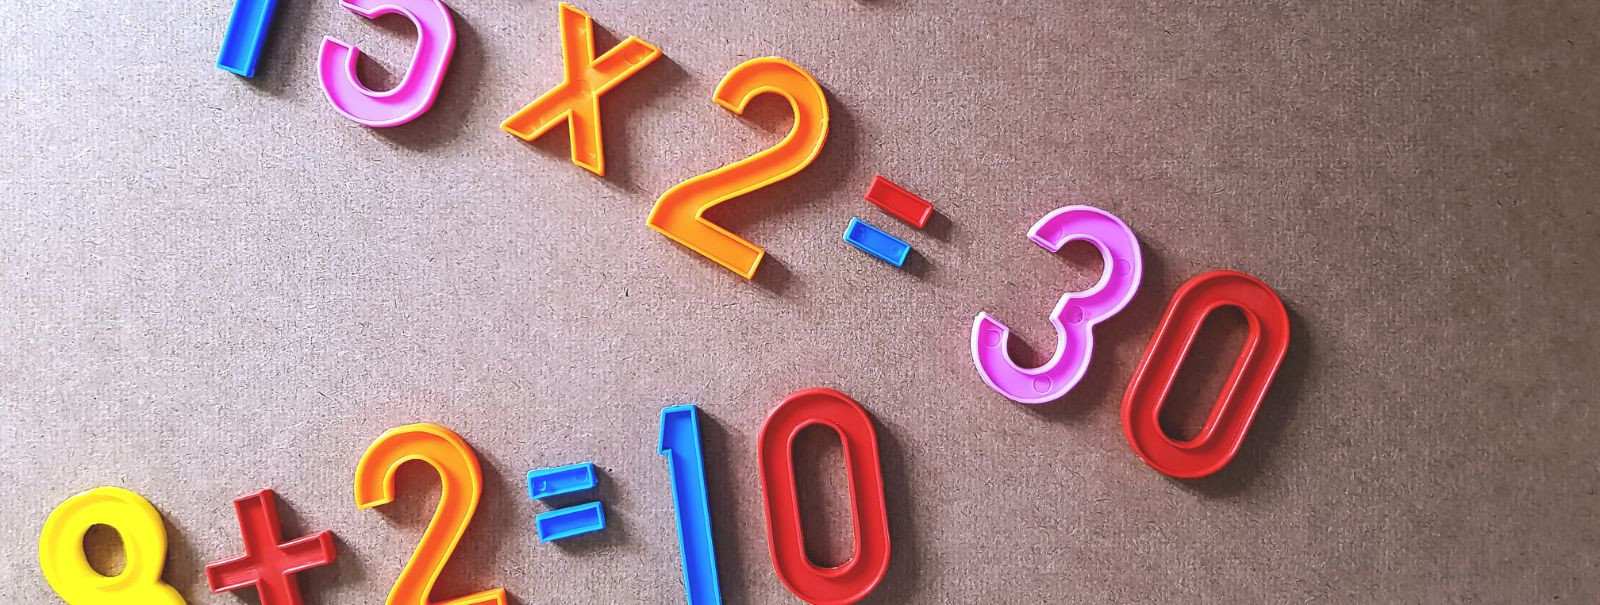 Mathematics is a fundamental skill that is critical for children's development and future academic success. However, traditional methods of teaching math can so